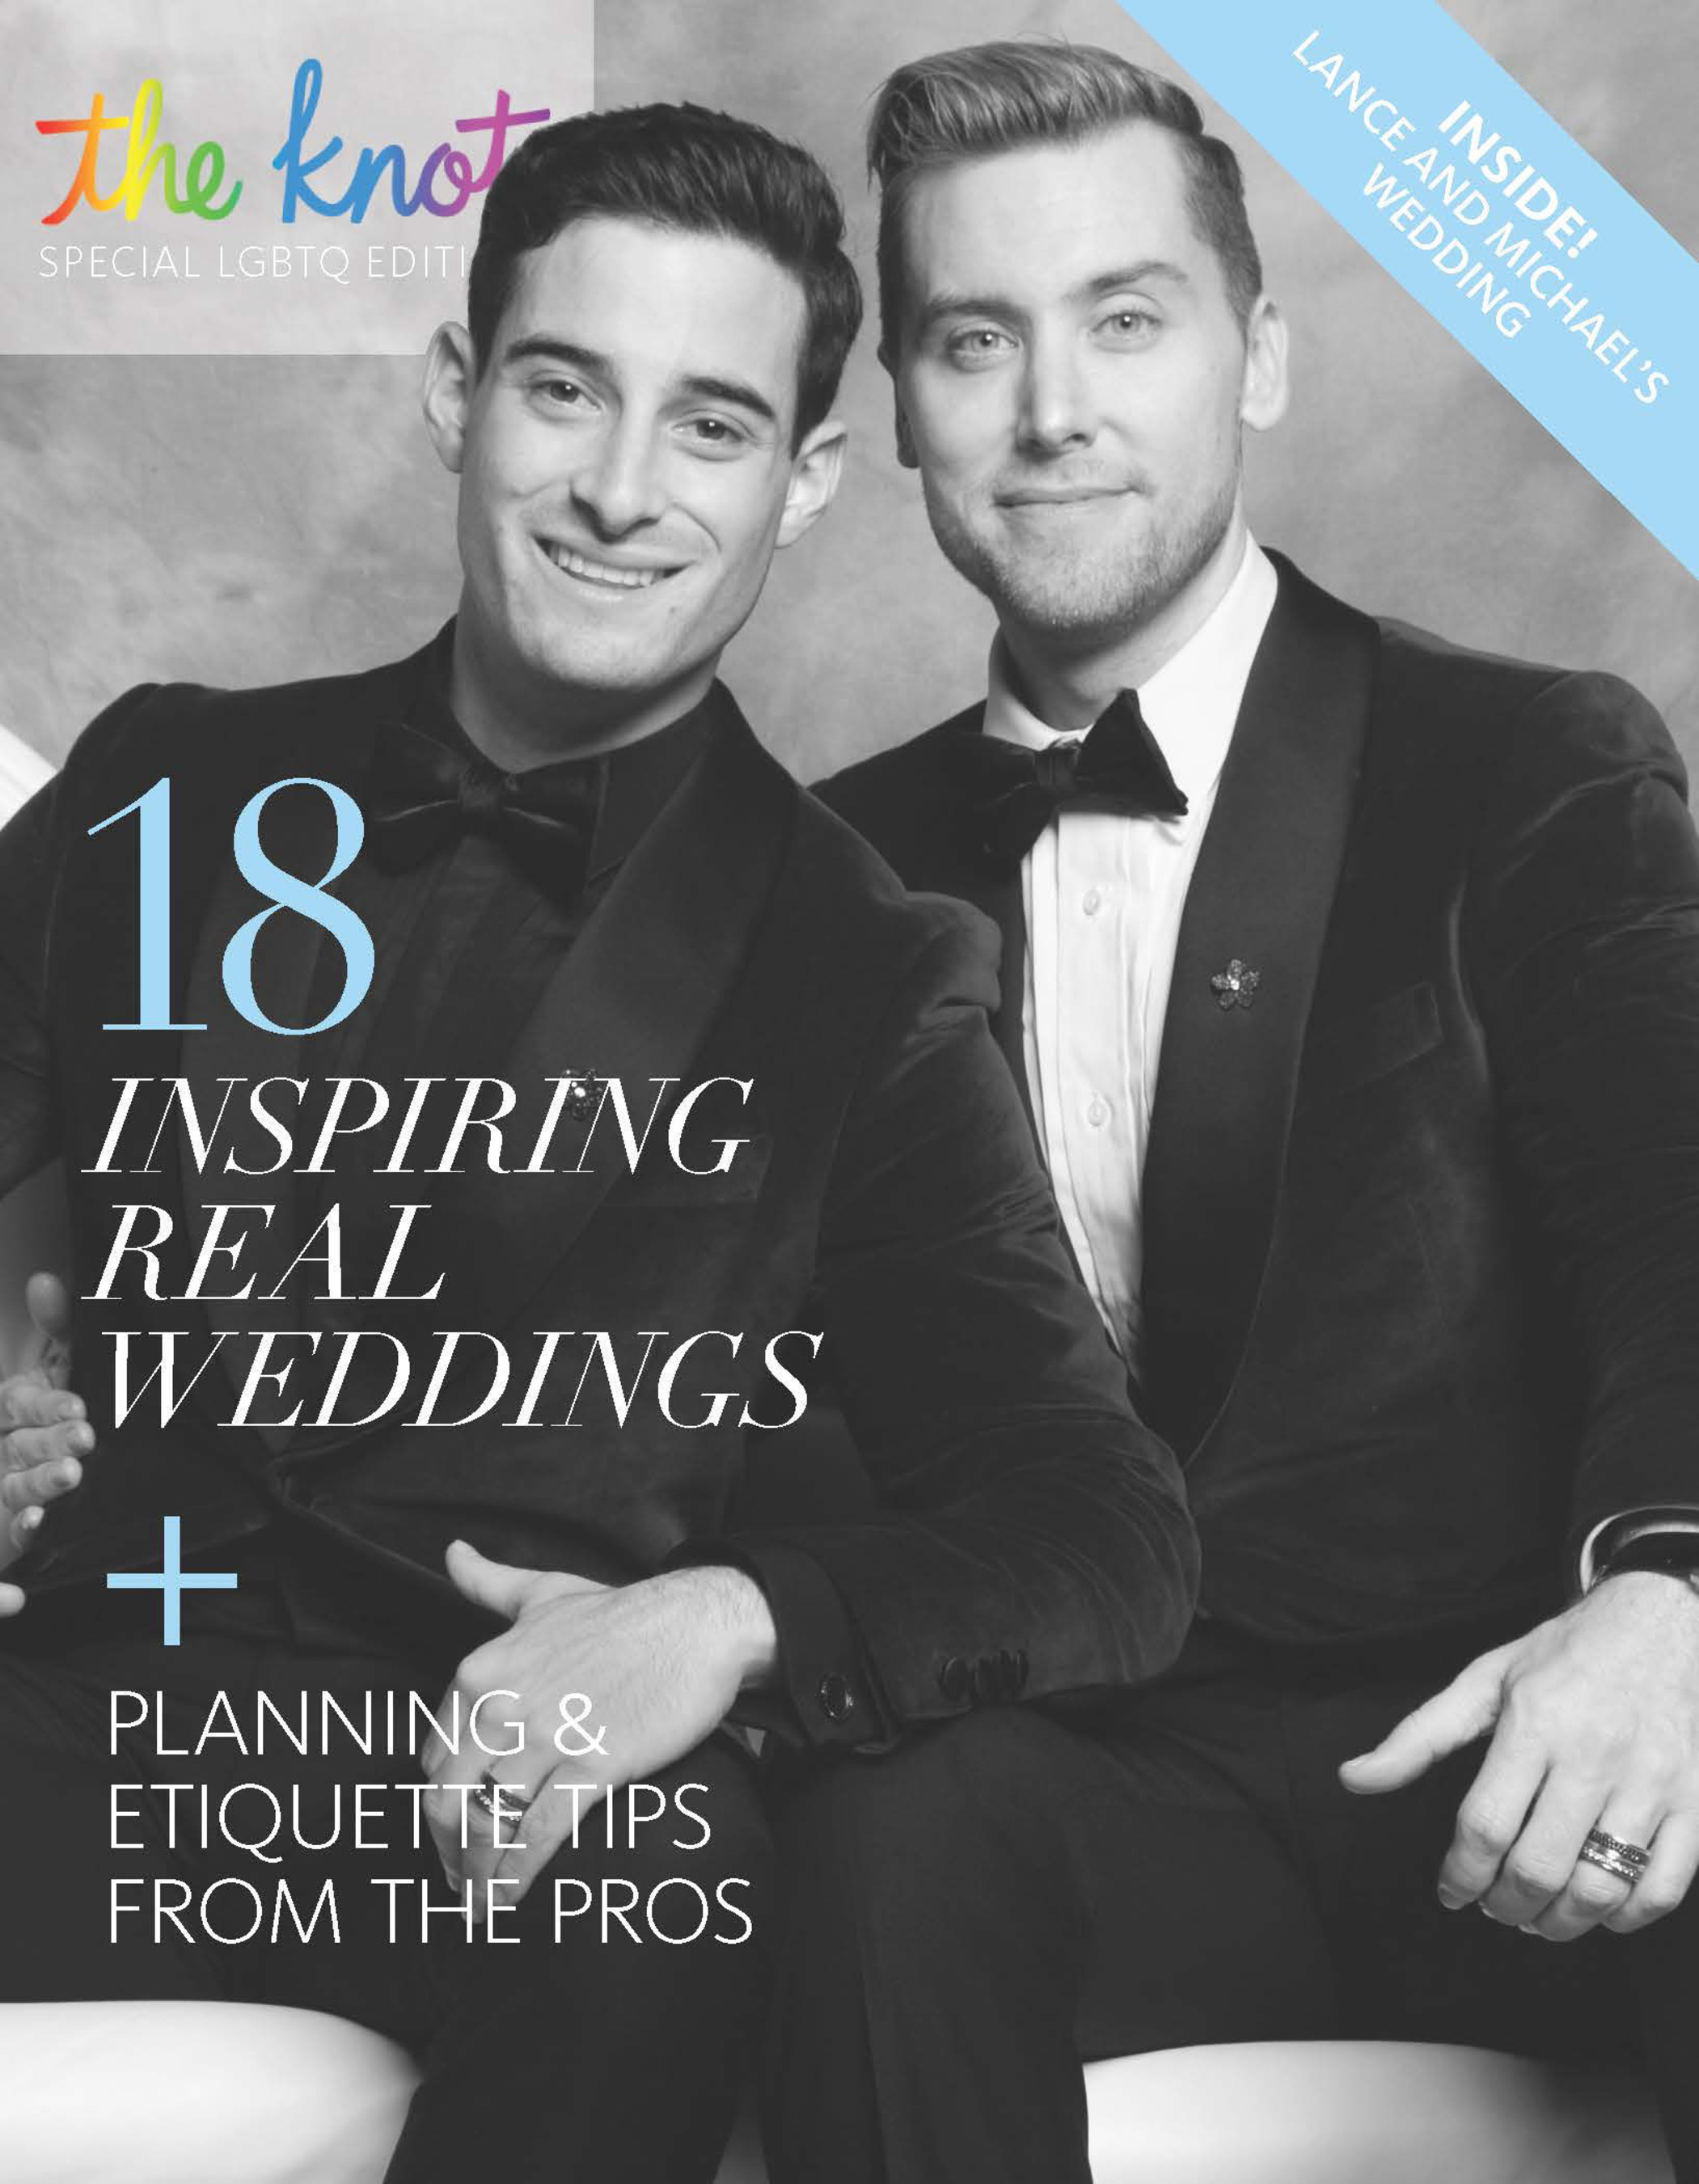 The Knot LGBTQ Edition 2015 features planning and etiquette tips from wedding professionals, along with inspiration from real weddings, including *NSYNC alum Lance Bass and his husband Michael Turchin's Los Angeles wedding.